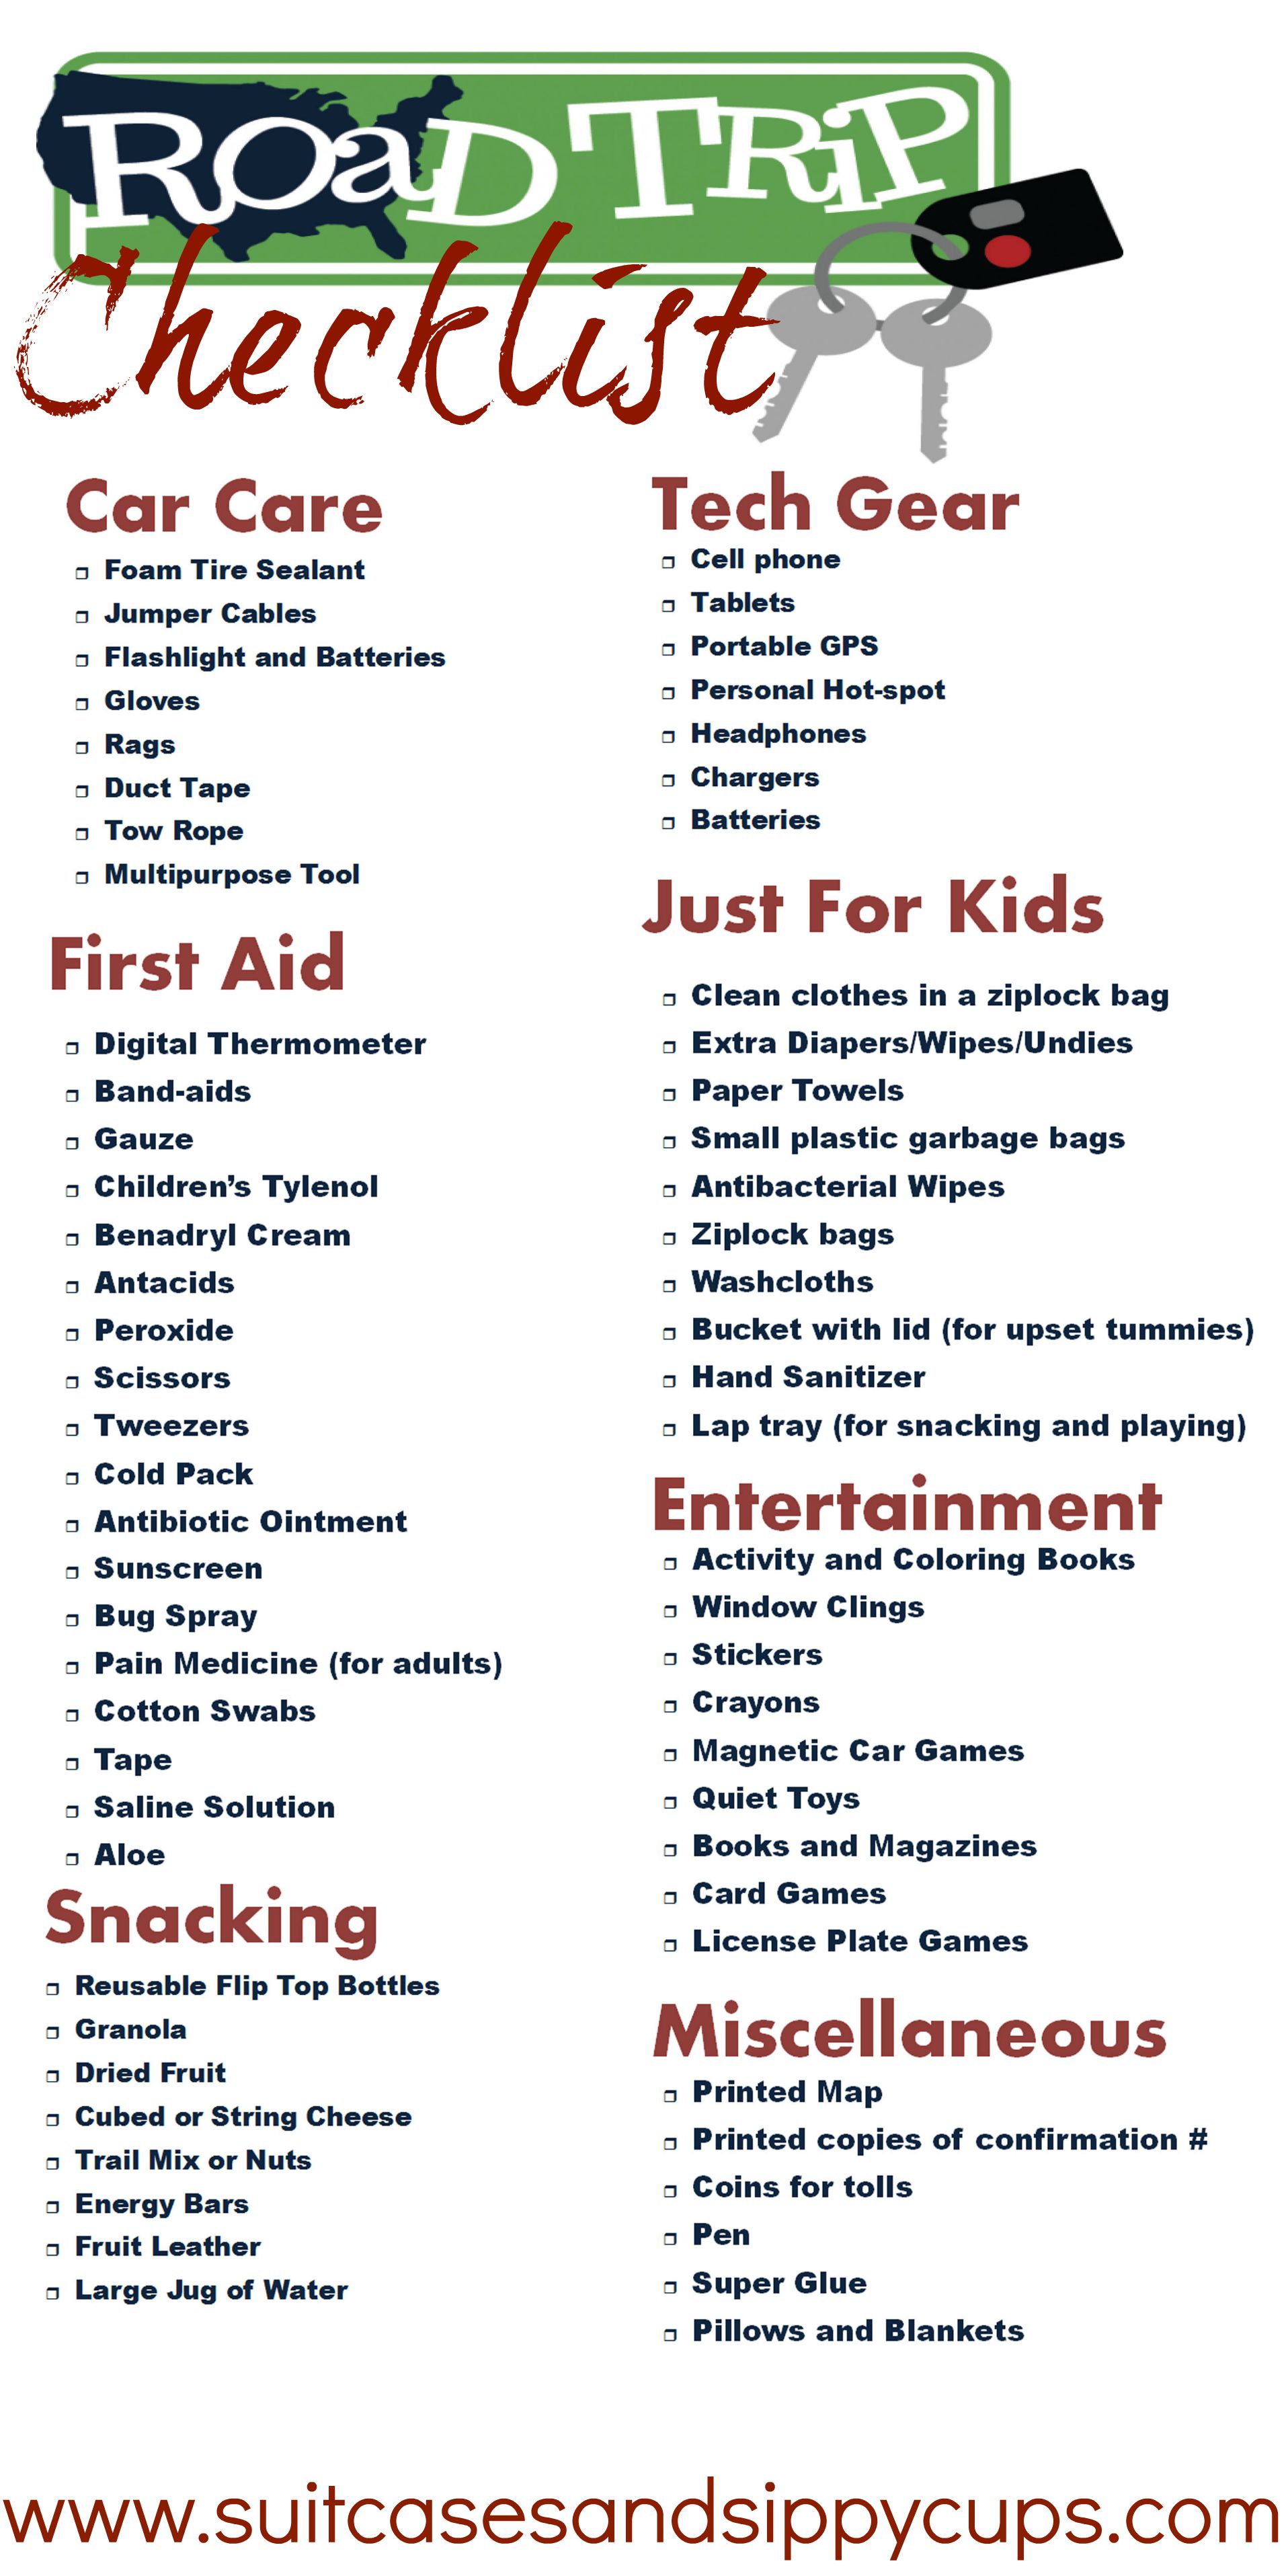 Road trip with kids: use this handy checklist as preparation!